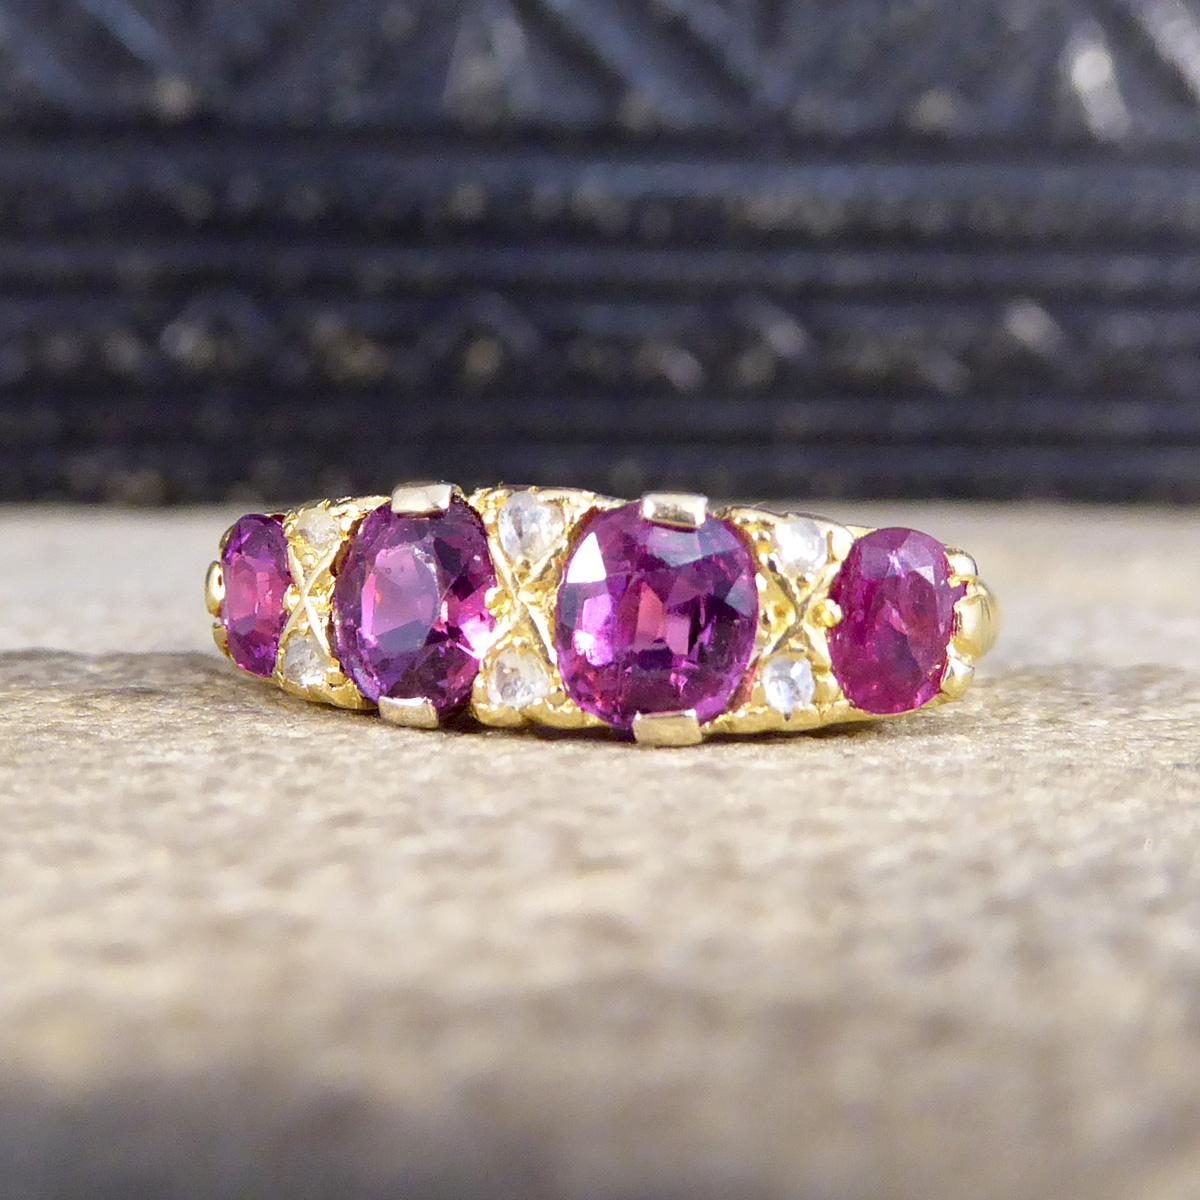 Oval Cut Antique Edwardian 1.18ct Ruby Four Stone Ring with Diamond Spacers 18ct Gold